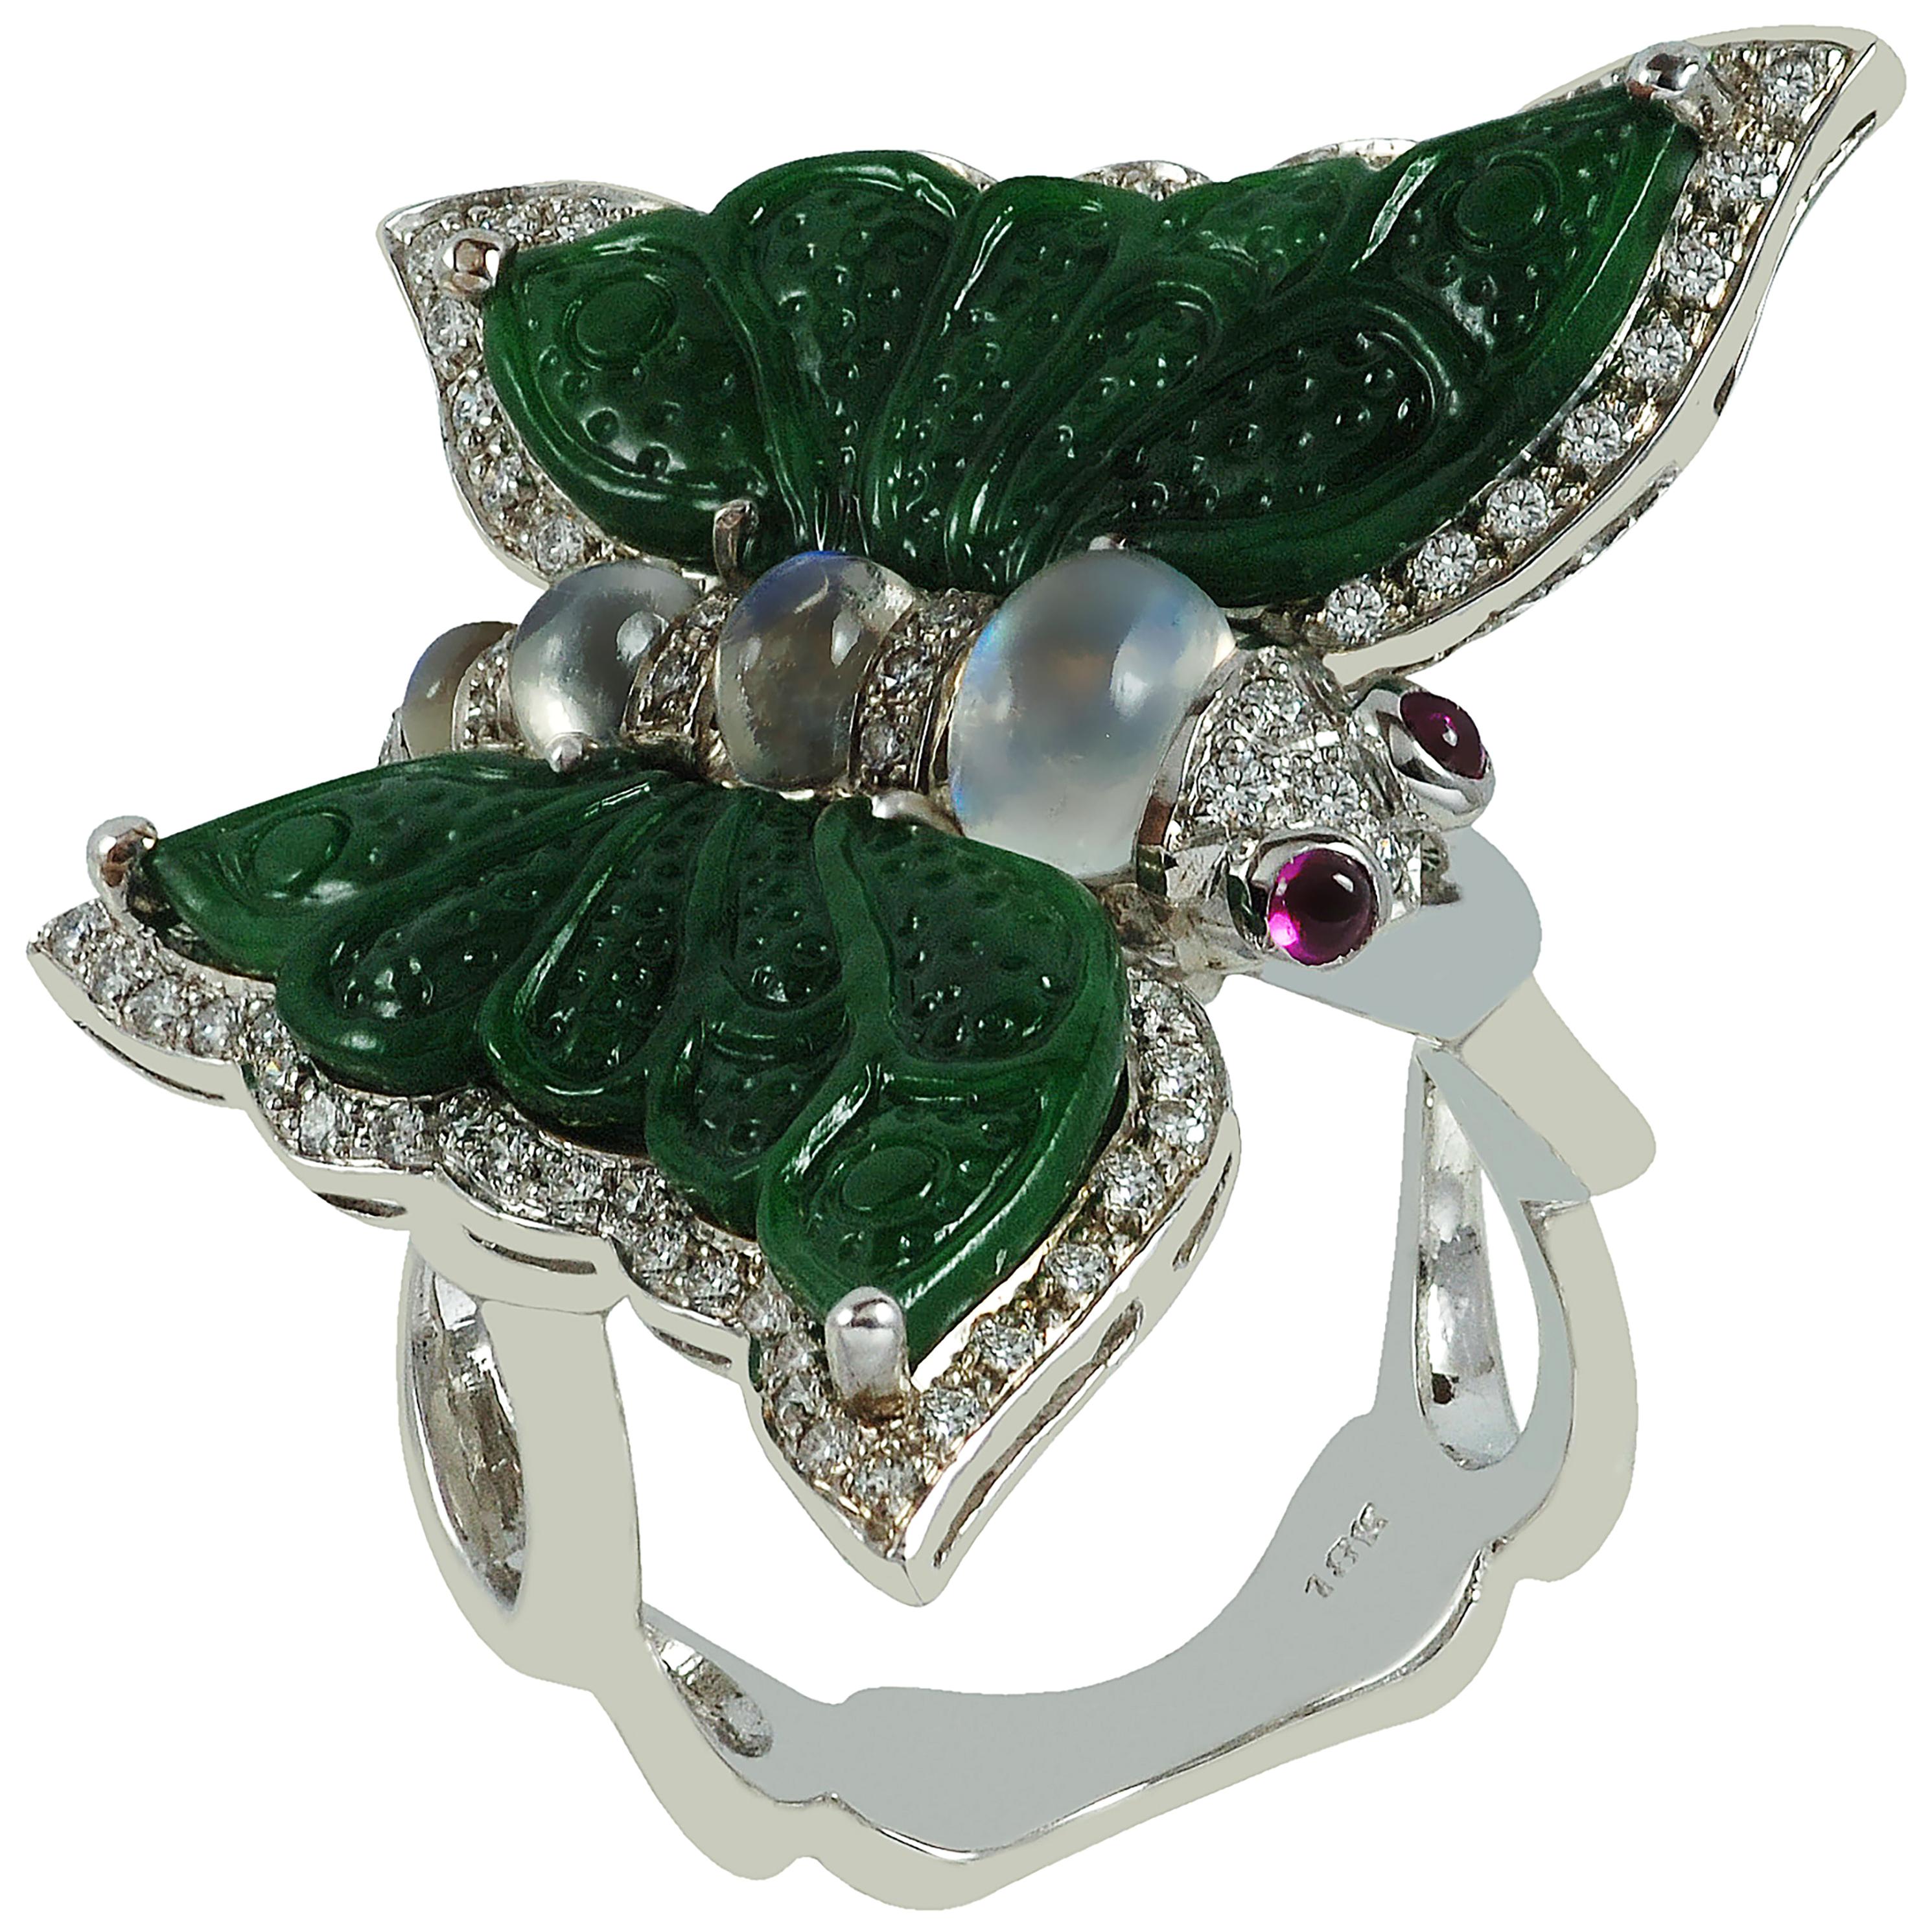 Moonstone, Carve Jade, Cabochon Ruby, Diamond Butterfly Rings in 18K White Gold 